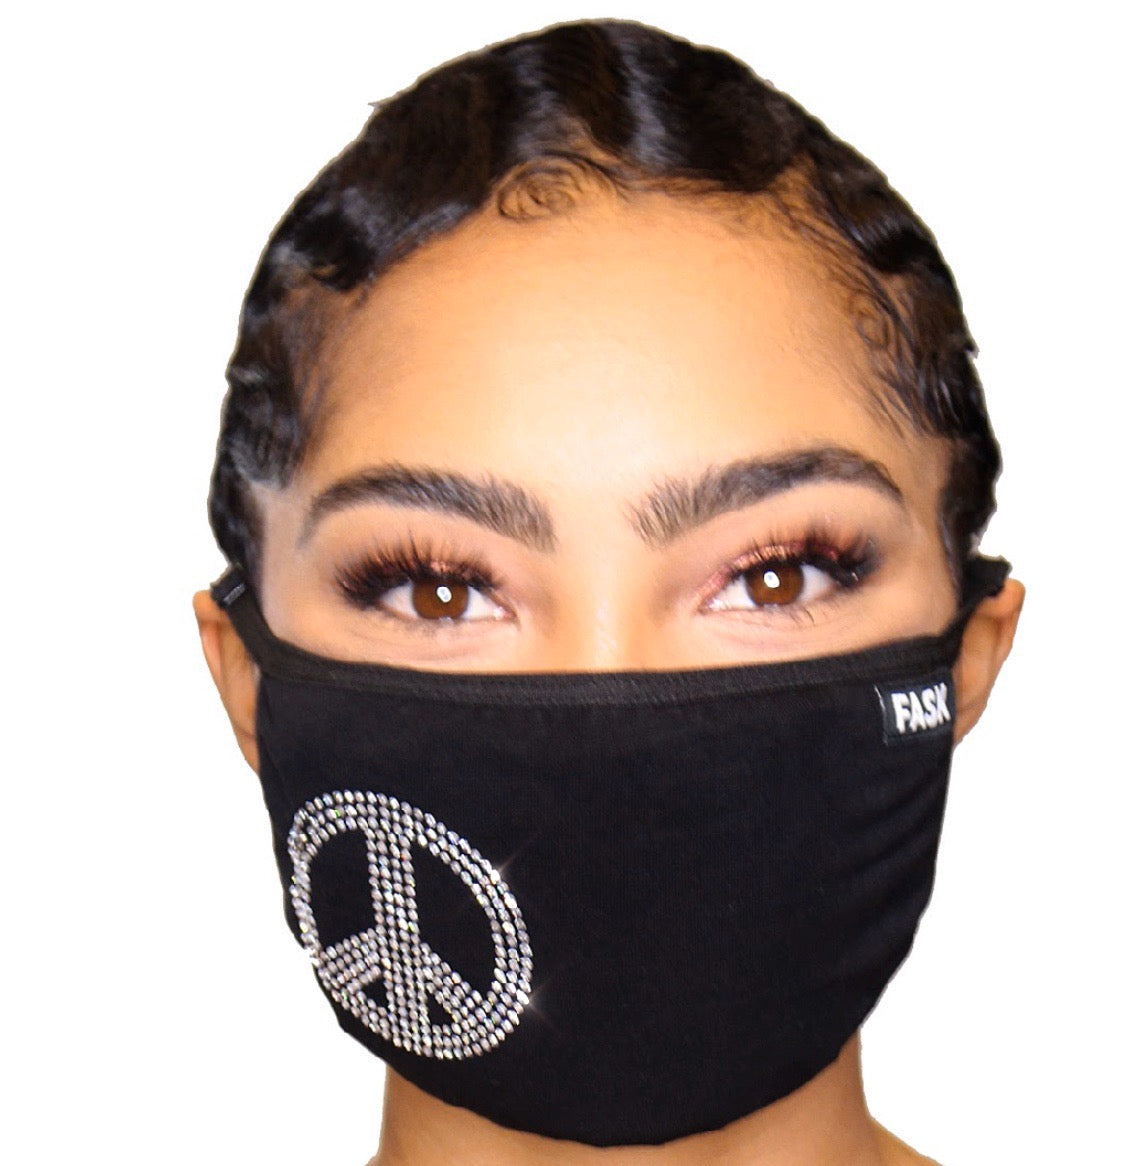 FASK Peace Cotton 2.0 Stoned Mask with Interchangeable Filter and Adjustable Size Strap